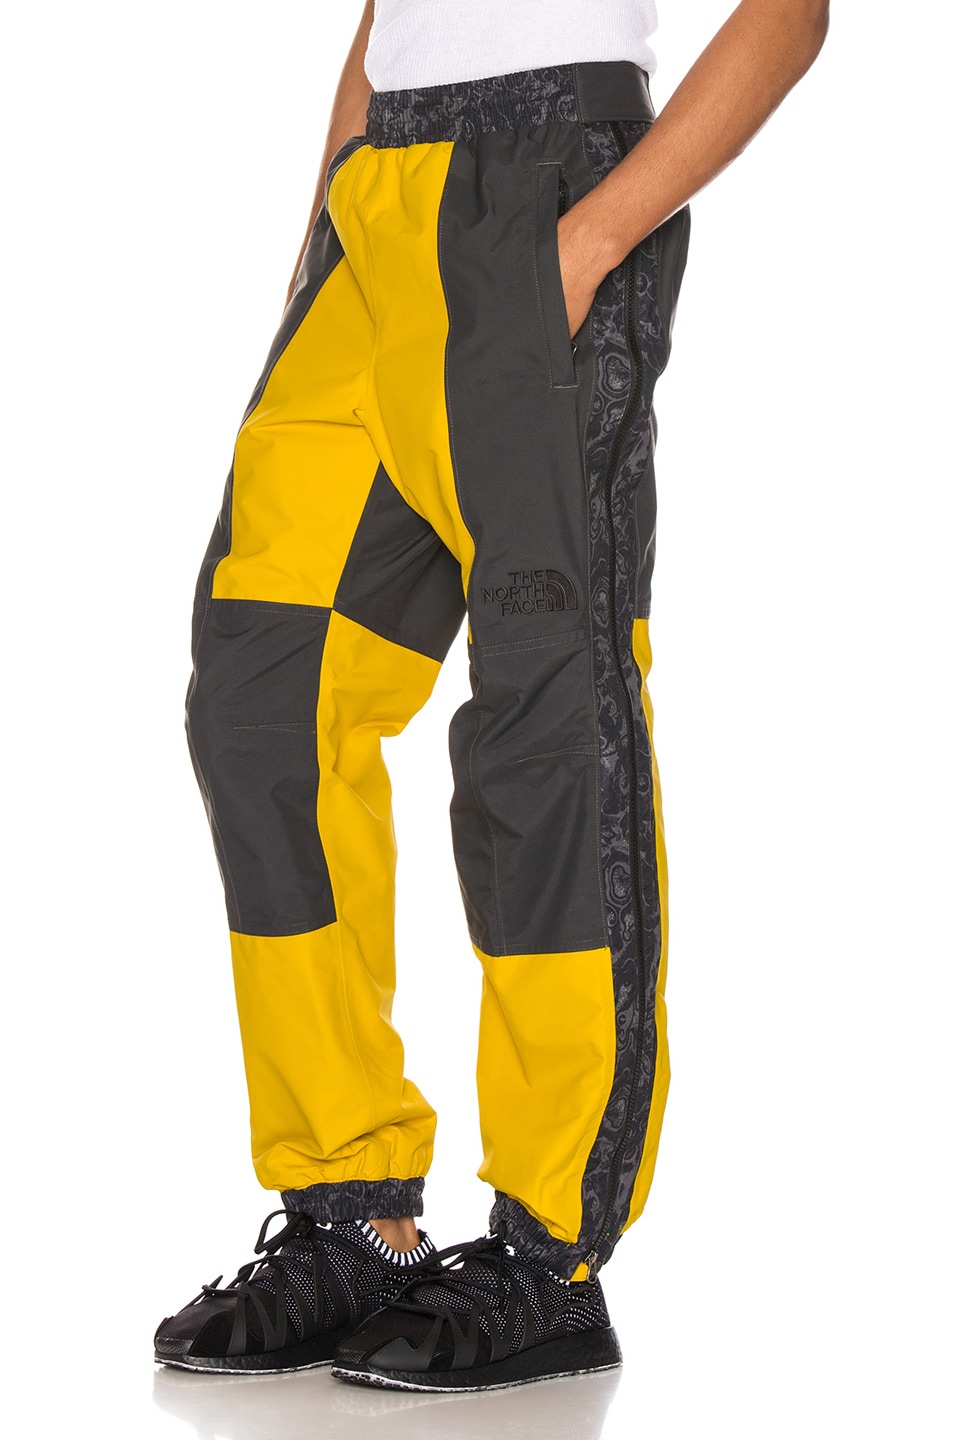 Image 1 of The North Face Black 94 Rage Rain Pant in Leopard Yellow & Asphalt Grey